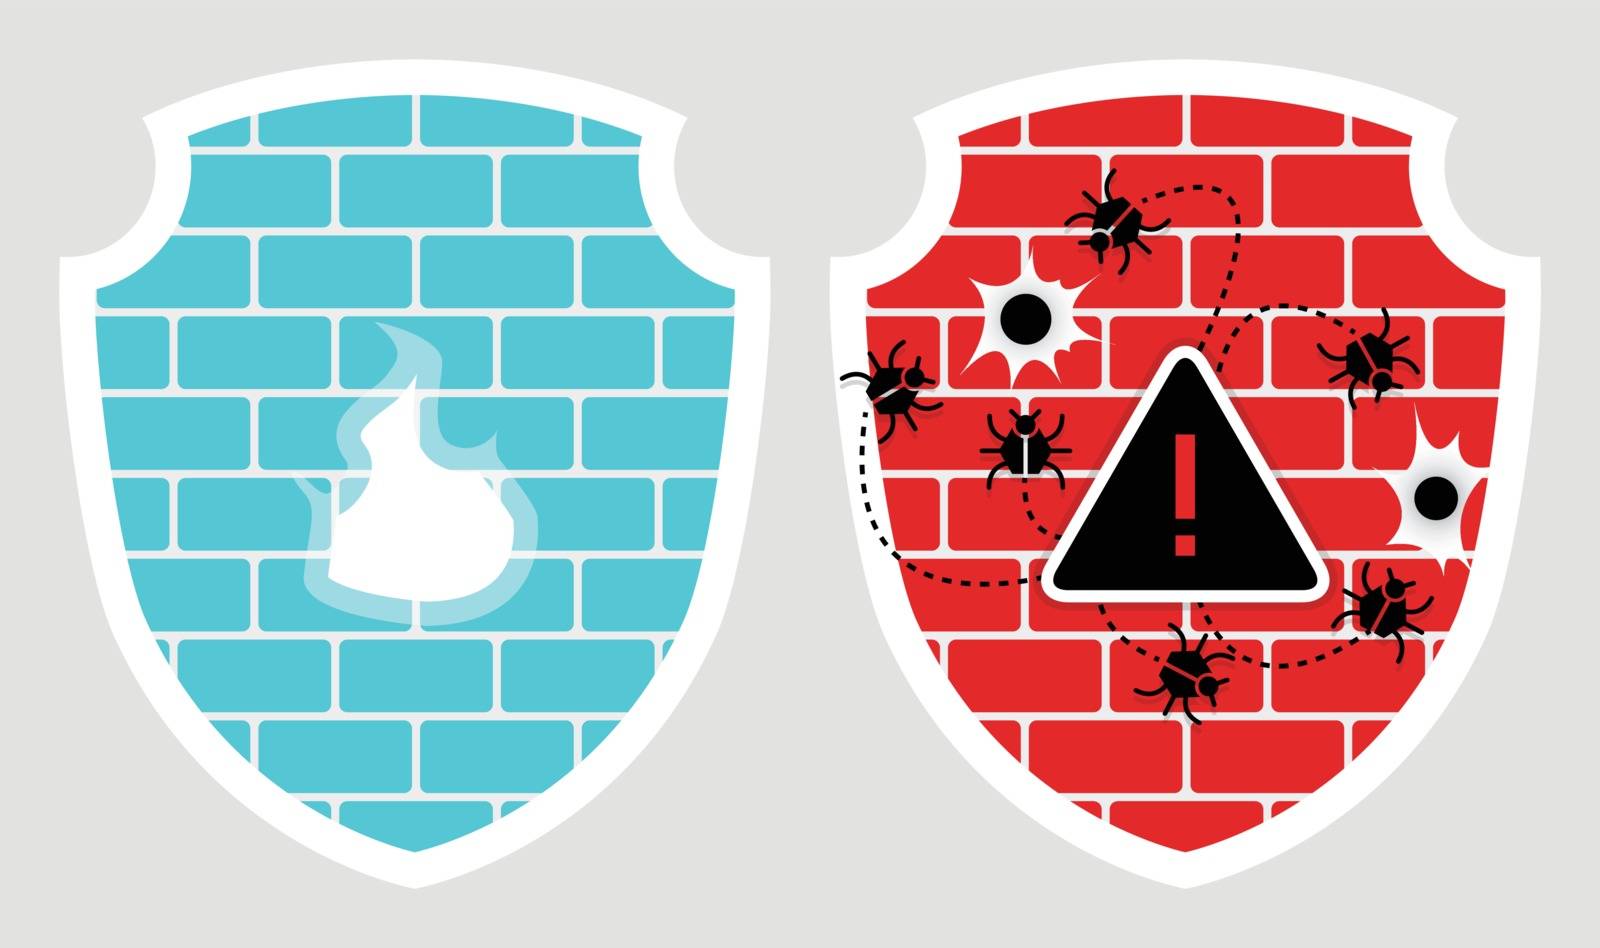 Set of 2 shields with cyber security brick wall icons with fire, bullet holes and bugs isolated on gray background. Data protection and cracked firewall symbols. Network security concept. Vector illustration by foxeel